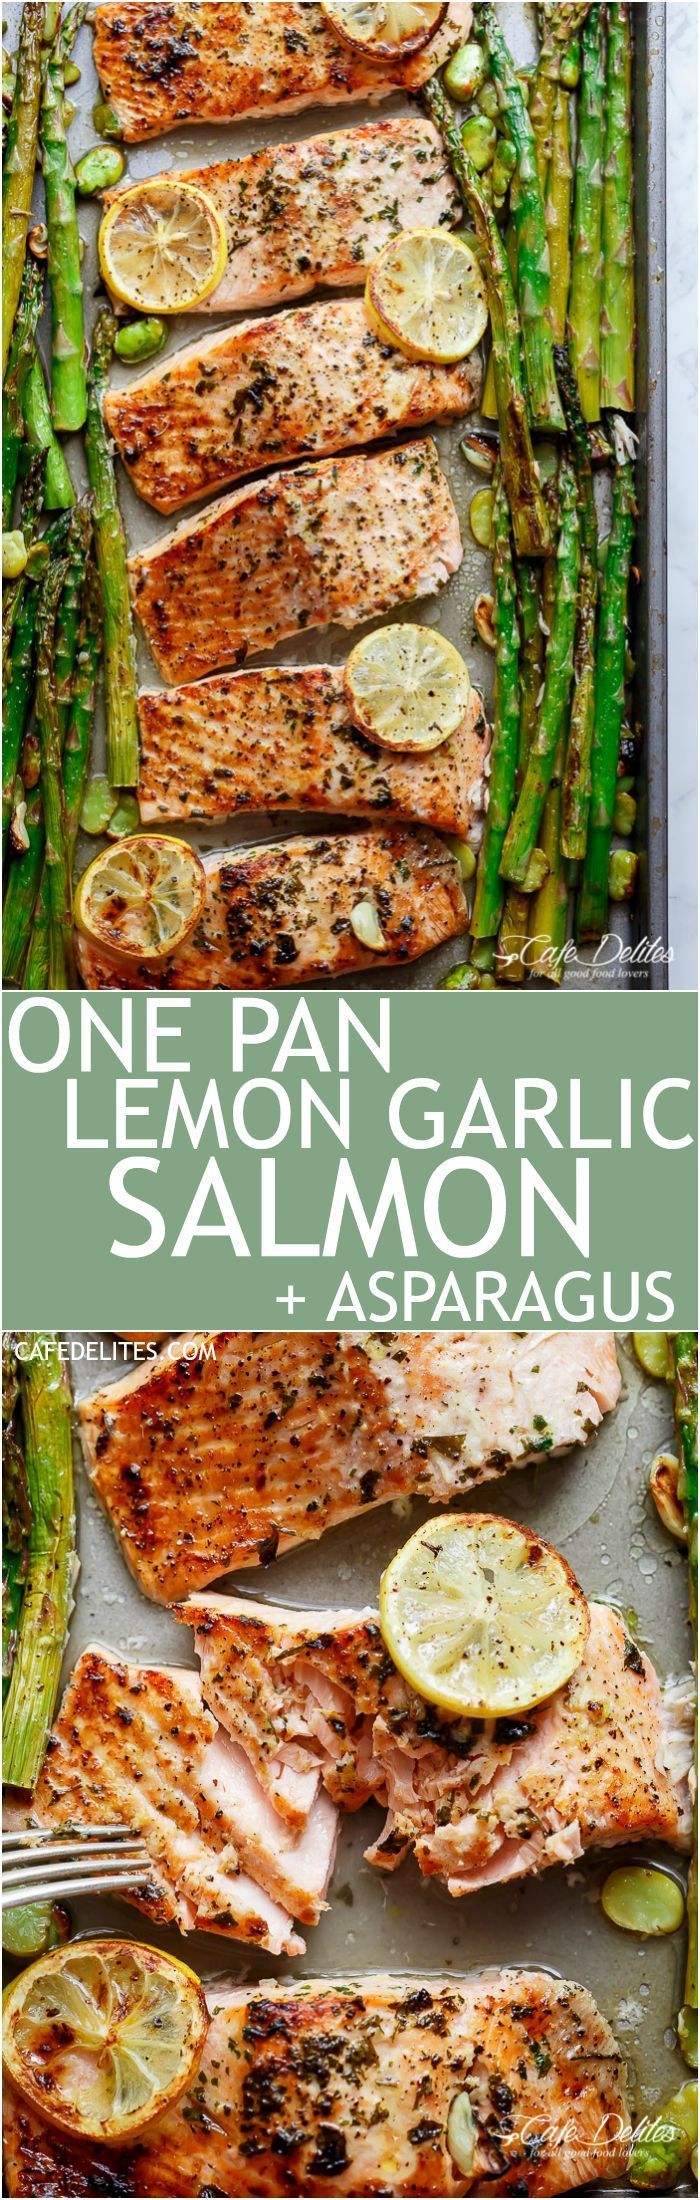 Lemon, garlic and parsley are infused in One Pan Lemon Garlic Baked Salmon + Asparagus ready in only 10 minutes without any